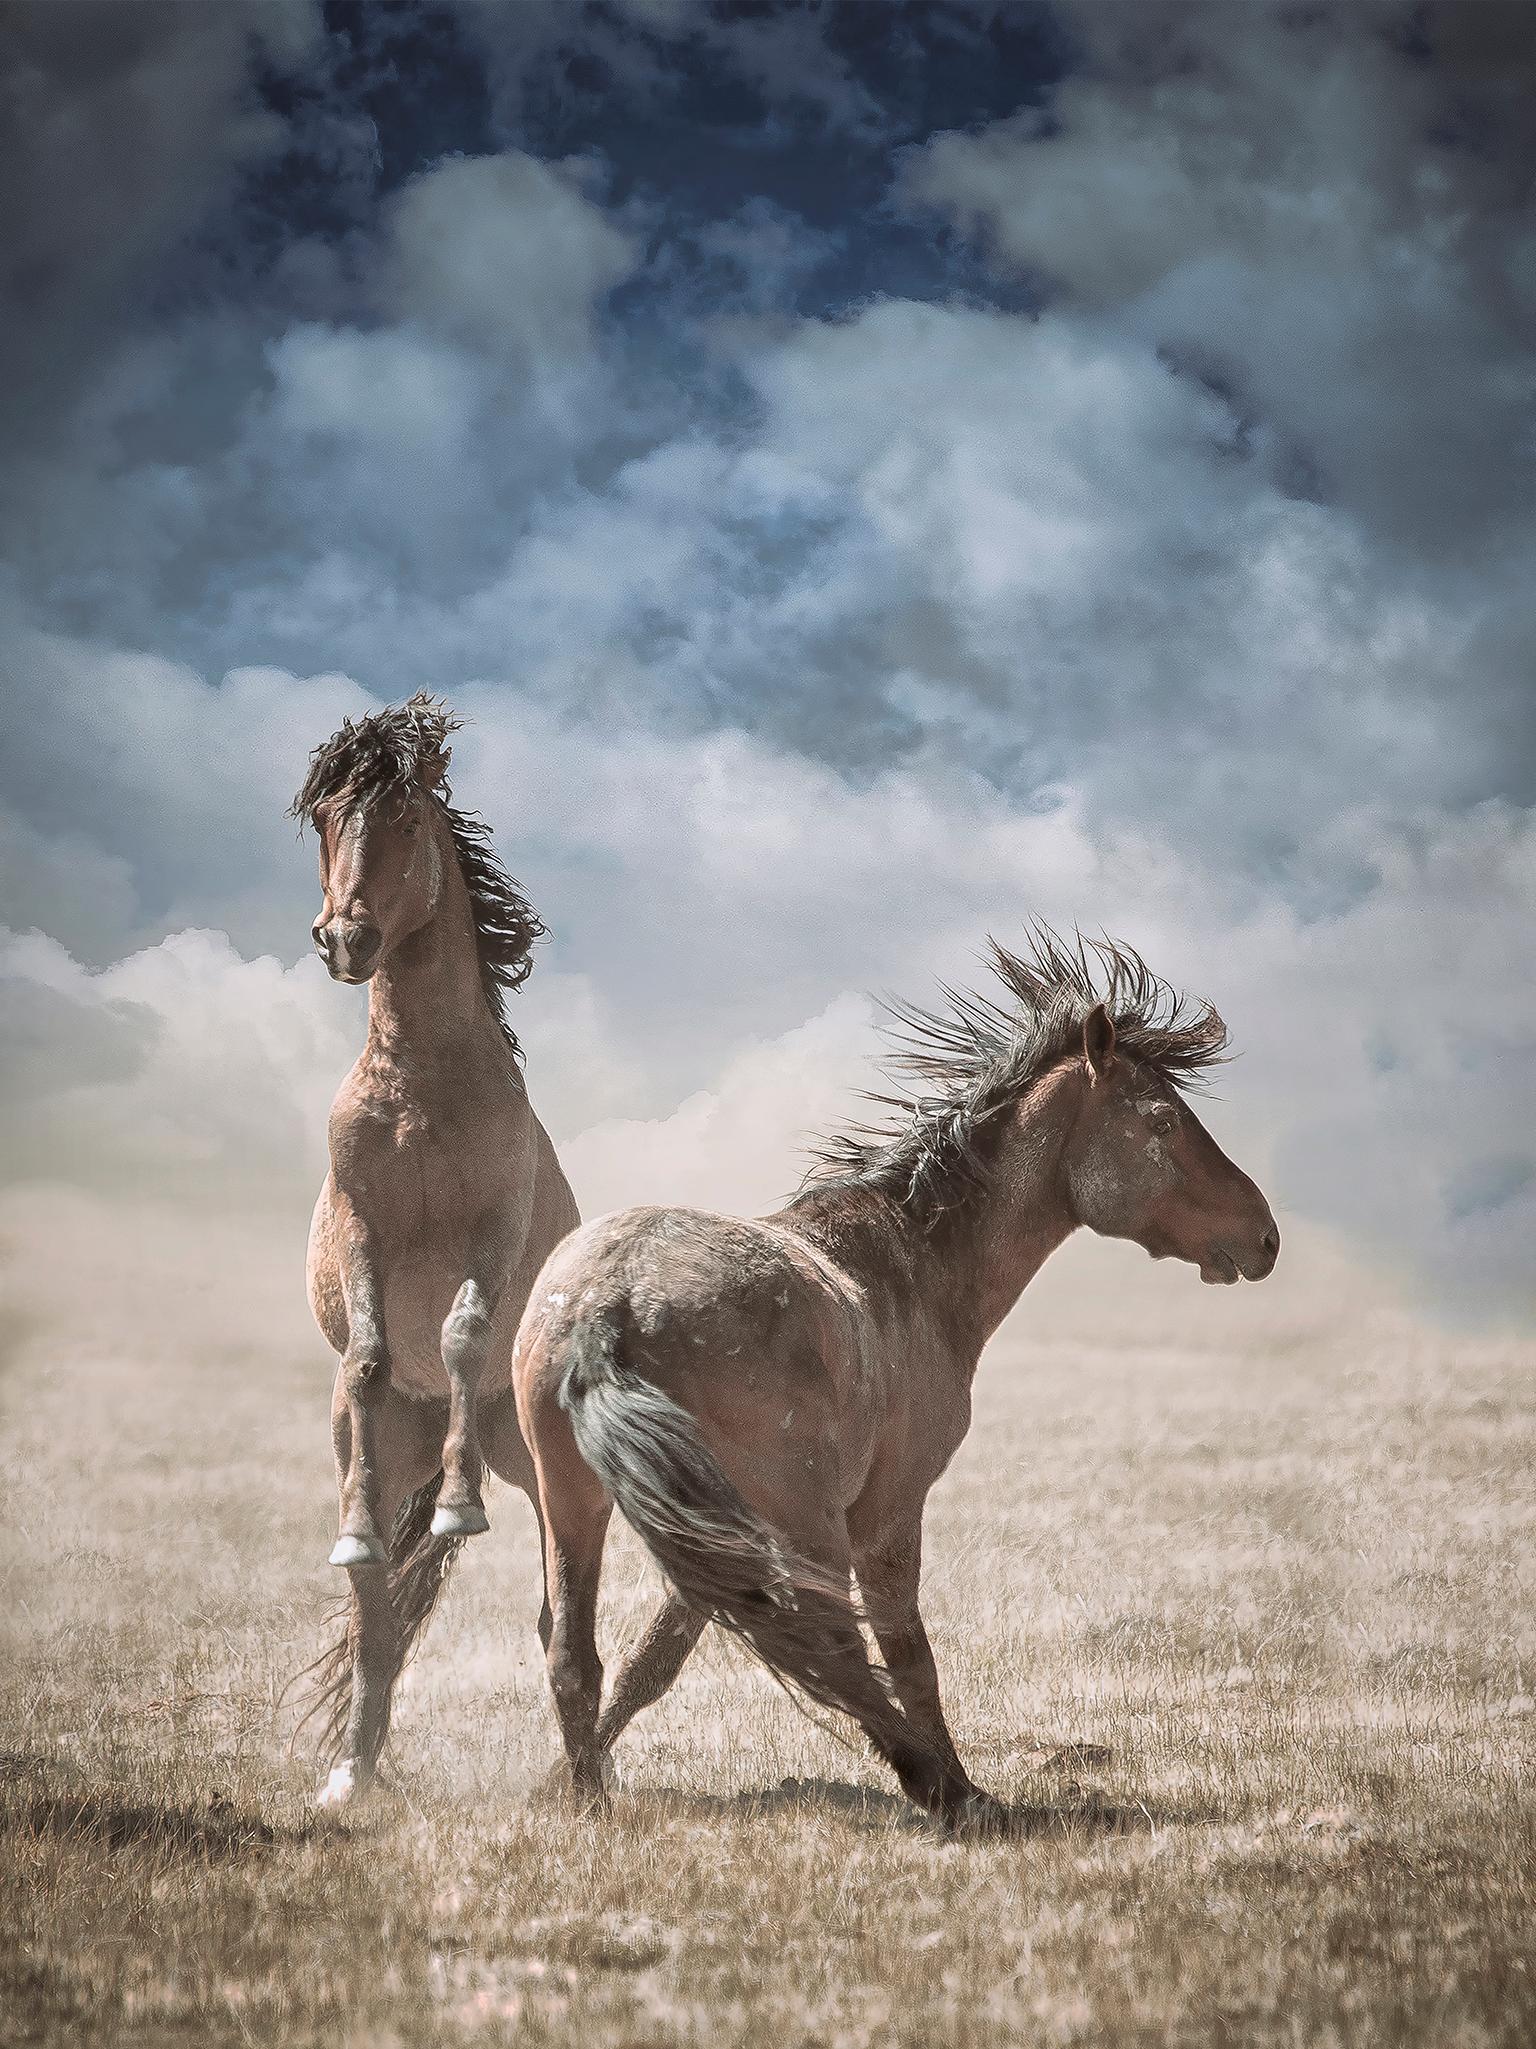 Shane Russeck Black and White Photograph - Wonder Horses 40 x 60  - Wild Horses - Wild Mustangs Photography Western Art